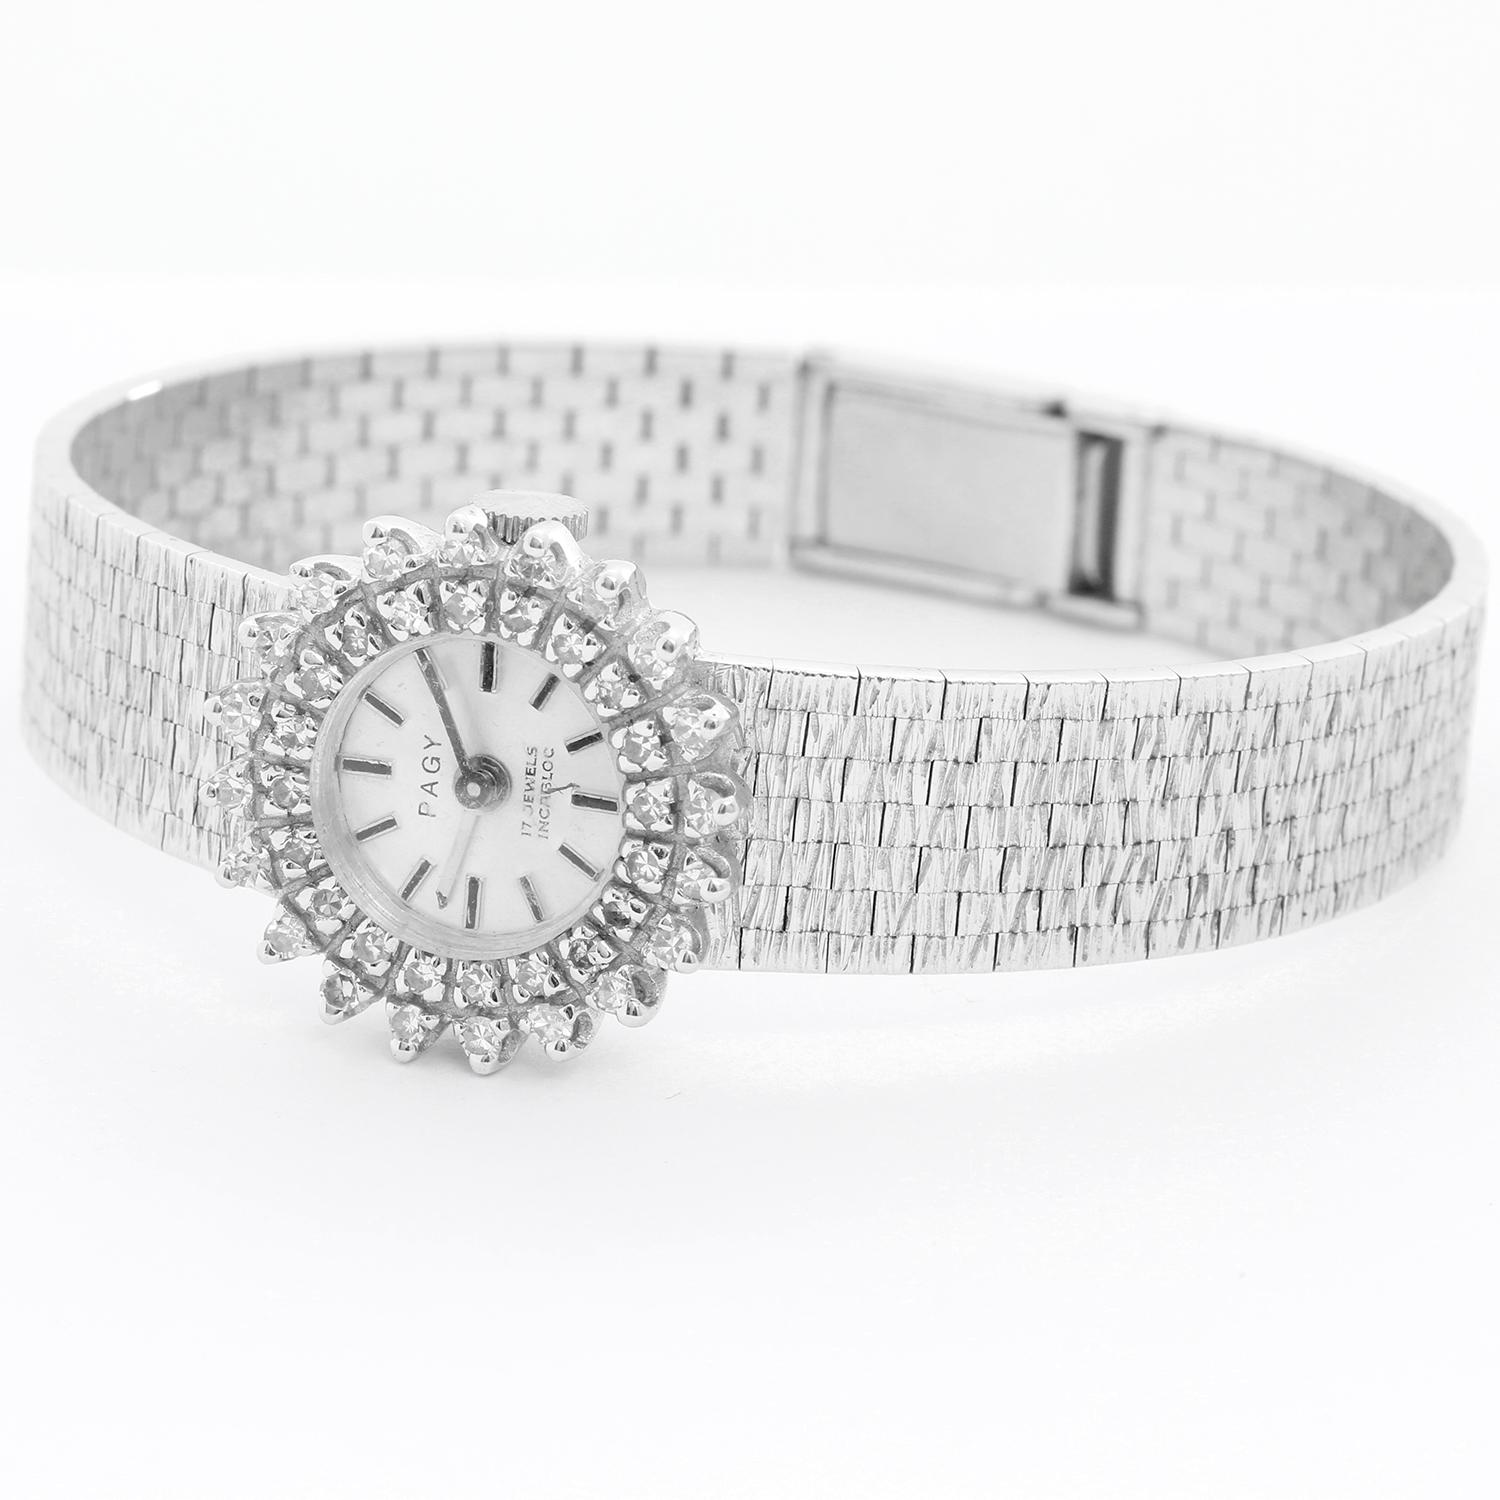 Vintage Ladies 18k White Gold & Diamond Pagy Watch -  Manual winding. 18k white gold case with beautiful diamond bezel (20mm diameter). Silver dial with stick markers. Note: slight imperfection at 6 o'clock. 18k white gold integrated mesh bracelet.